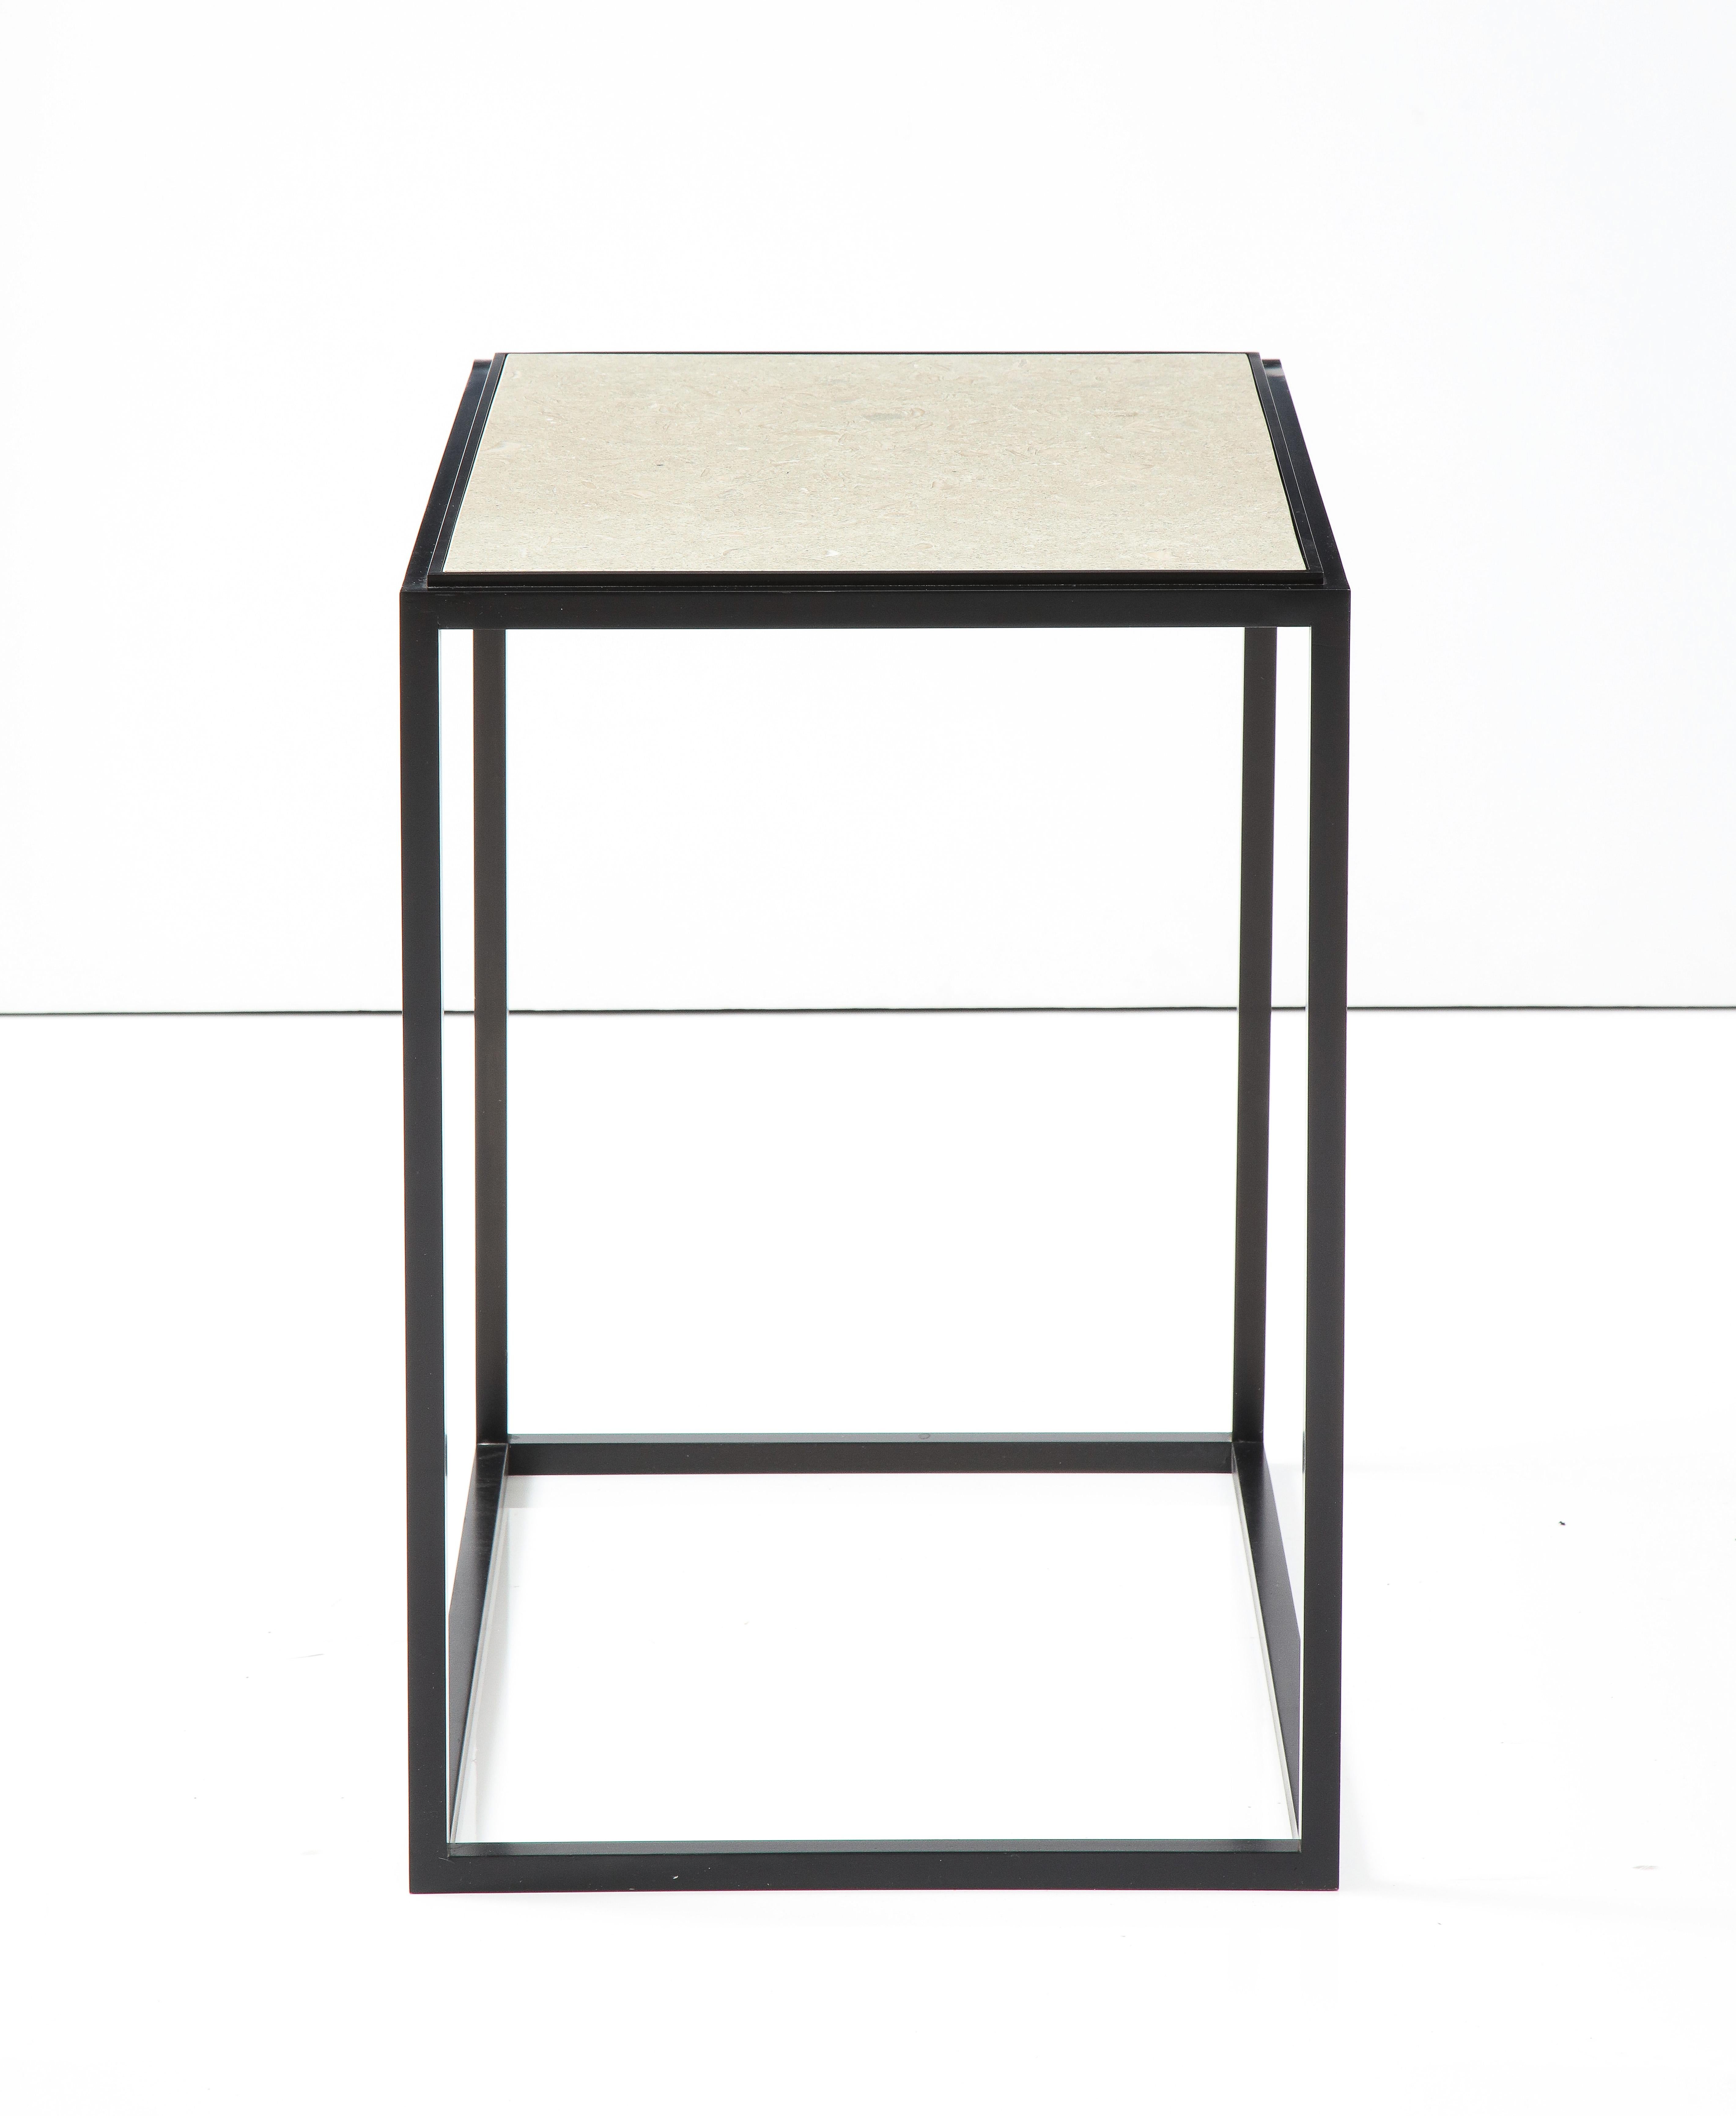 American Made to Order Stone Top Side Table with Solid Metal Base For Sale